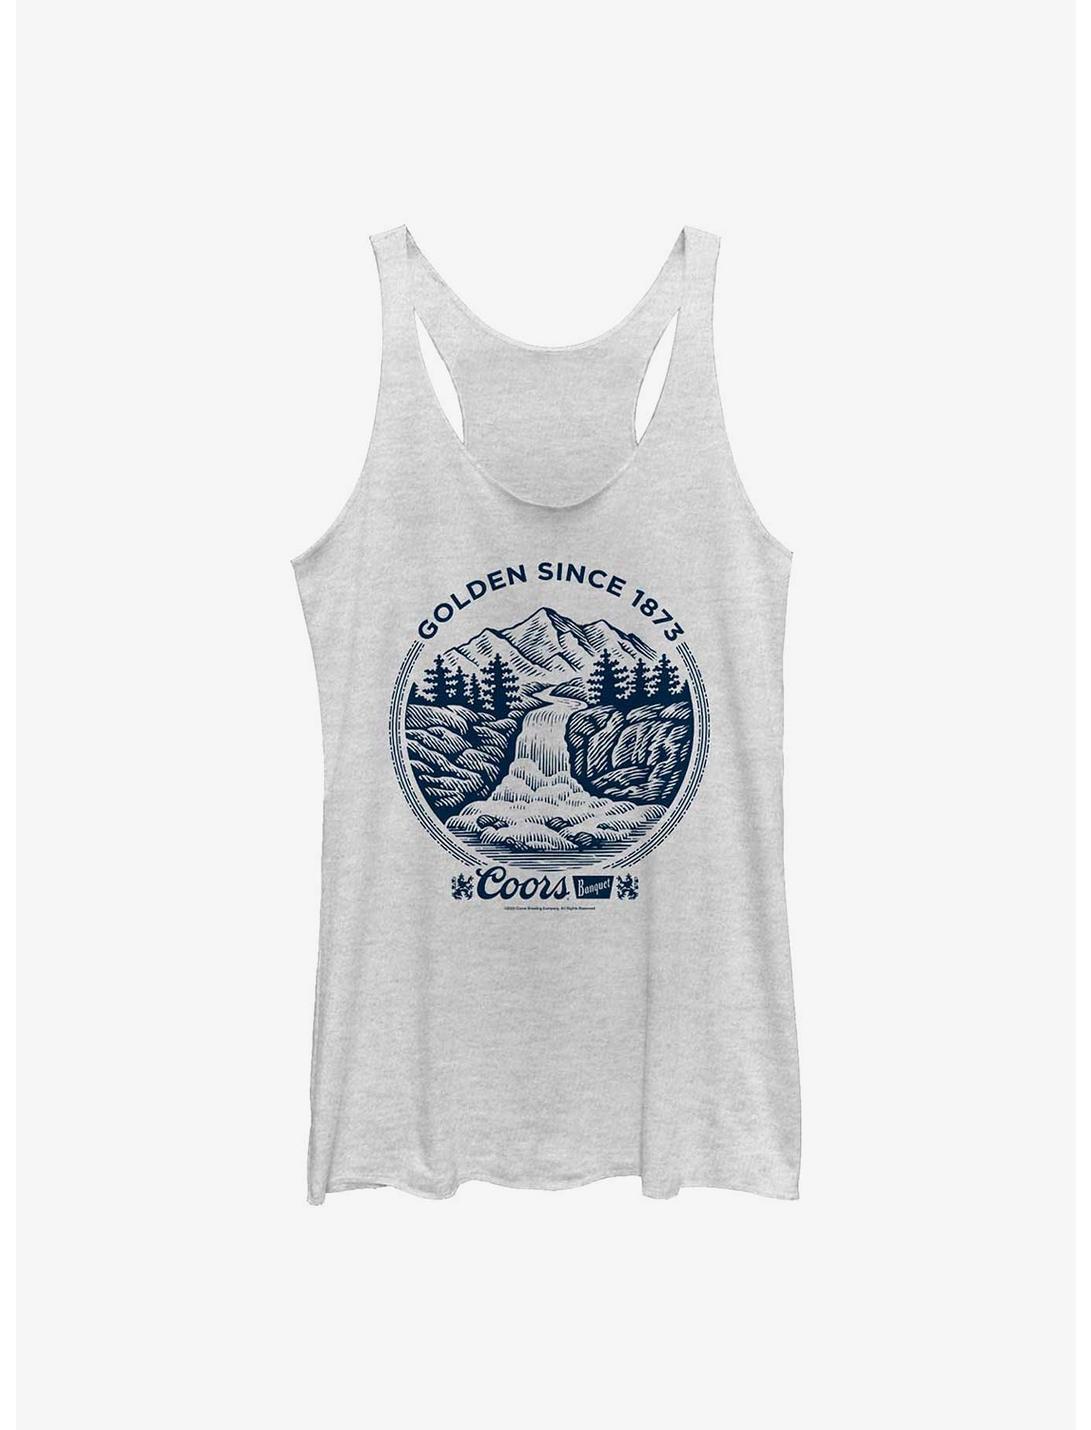 Coors Golden Since 1873 Womens Tank Top, WHITE HTR, hi-res